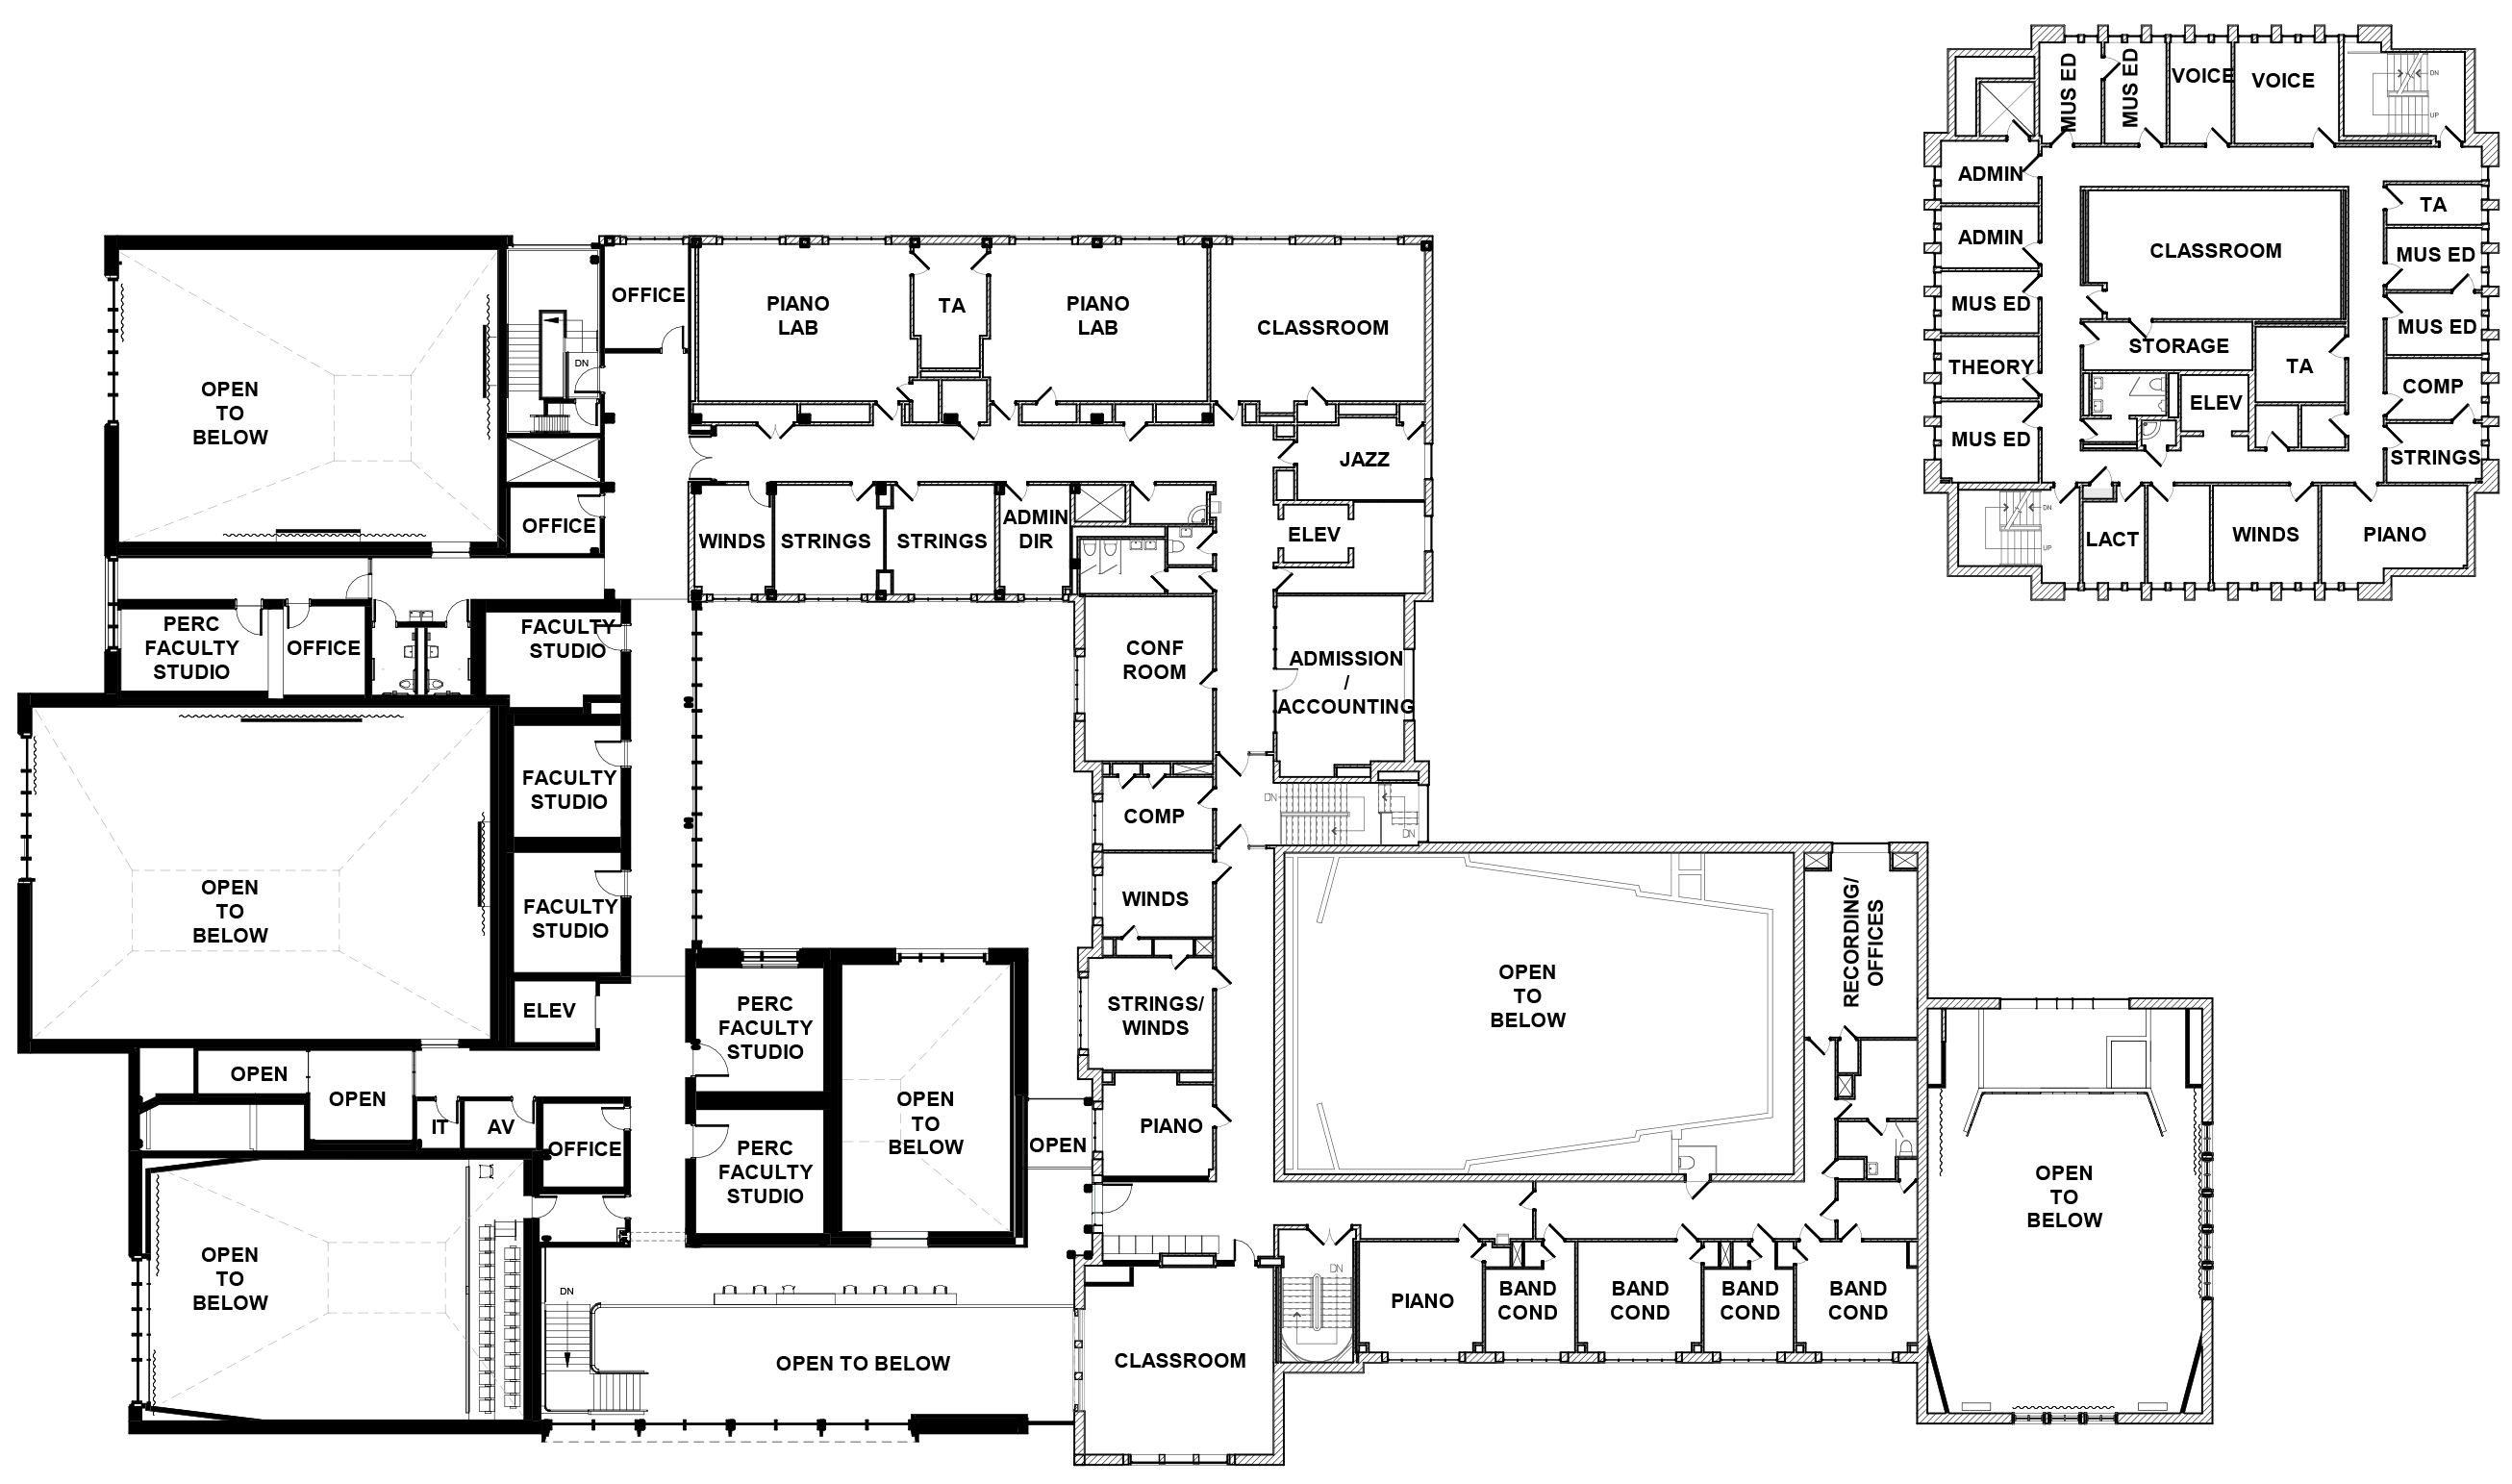 Billman Pavilion Spaces and Floor Plans MSU College of Music